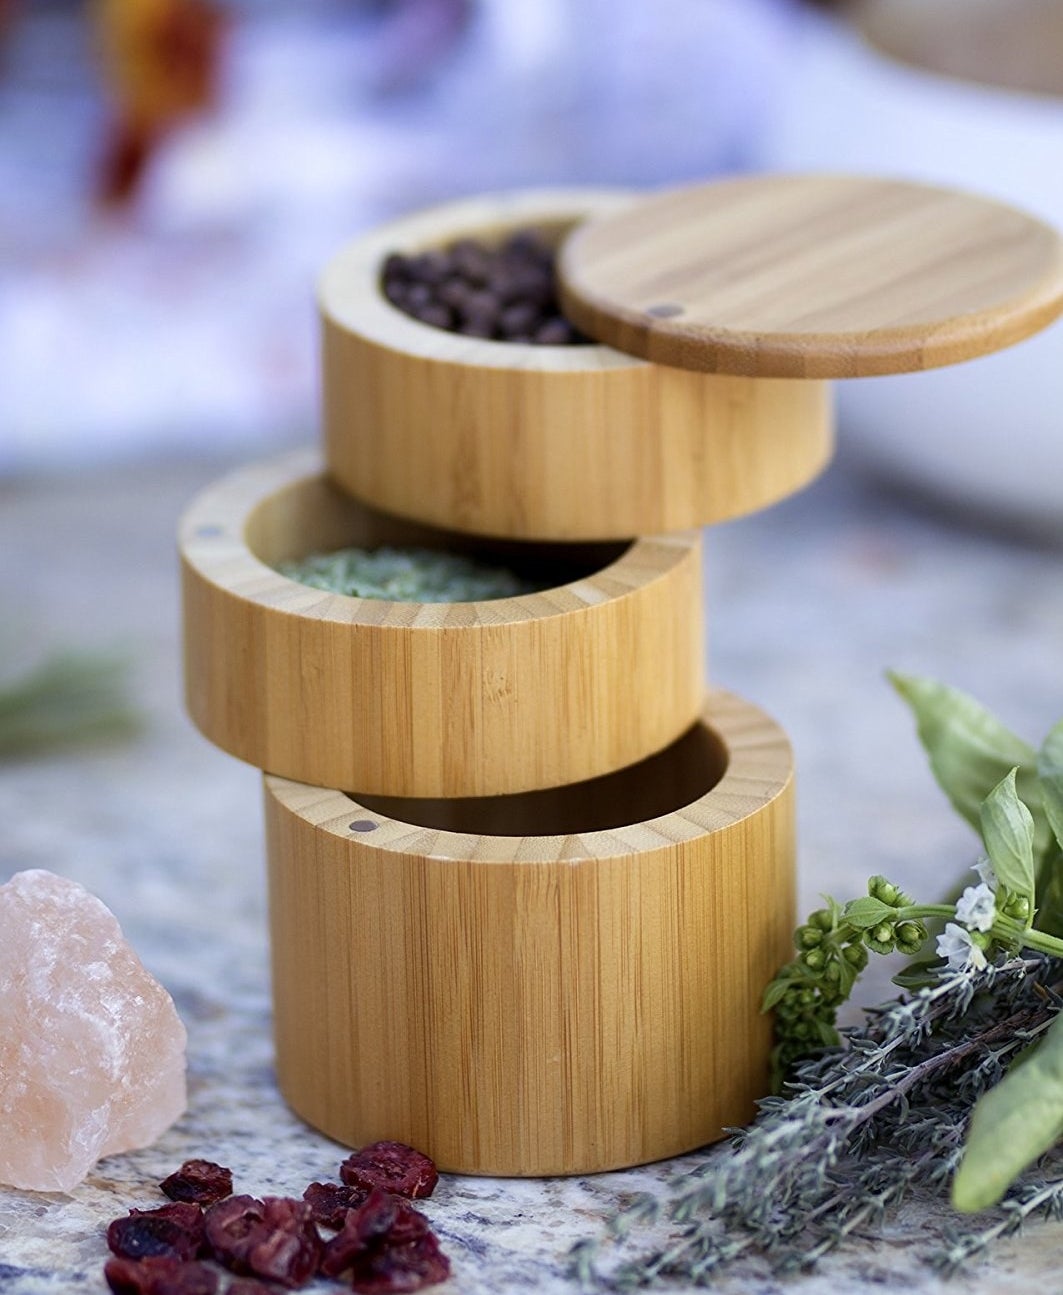 a close up of the cylindrical three tier bamboo storage box with different spices inside